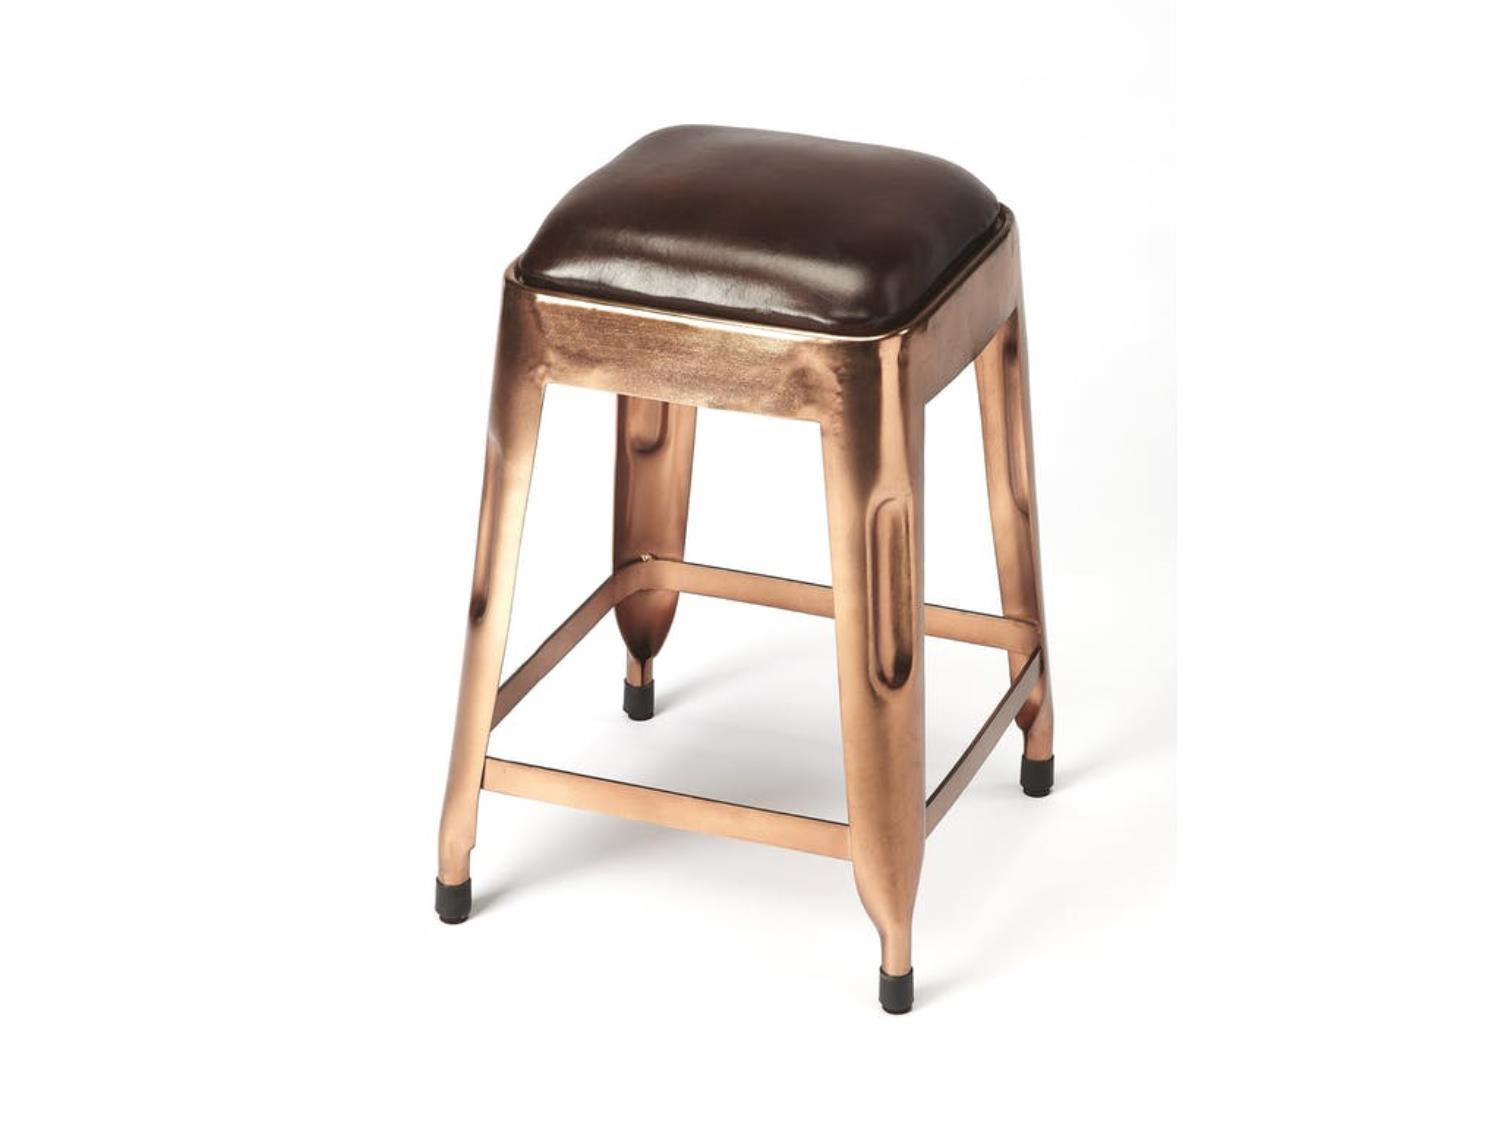 Butler Transitional Industrial Chic Square Copper Accent Stool 4400344